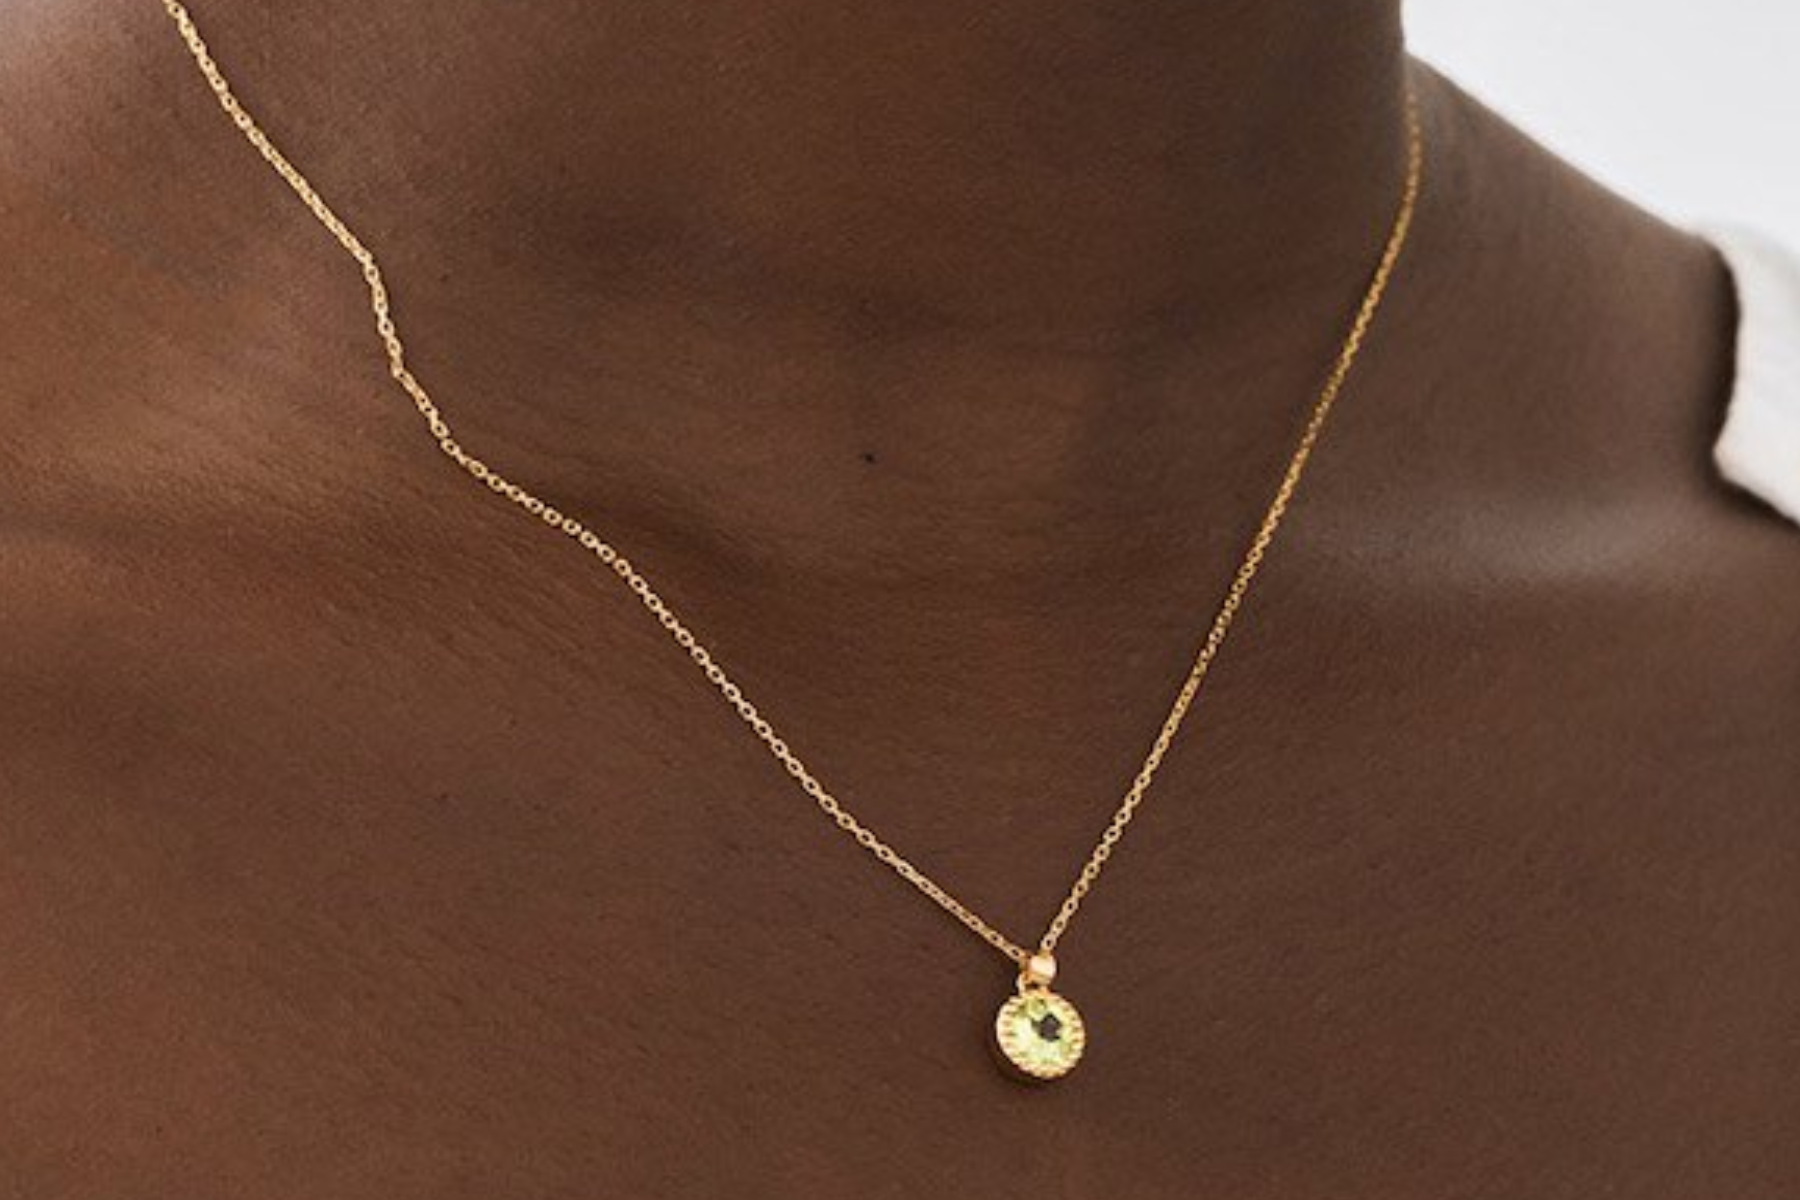 A black woman wearing a necklace with a gold pendant